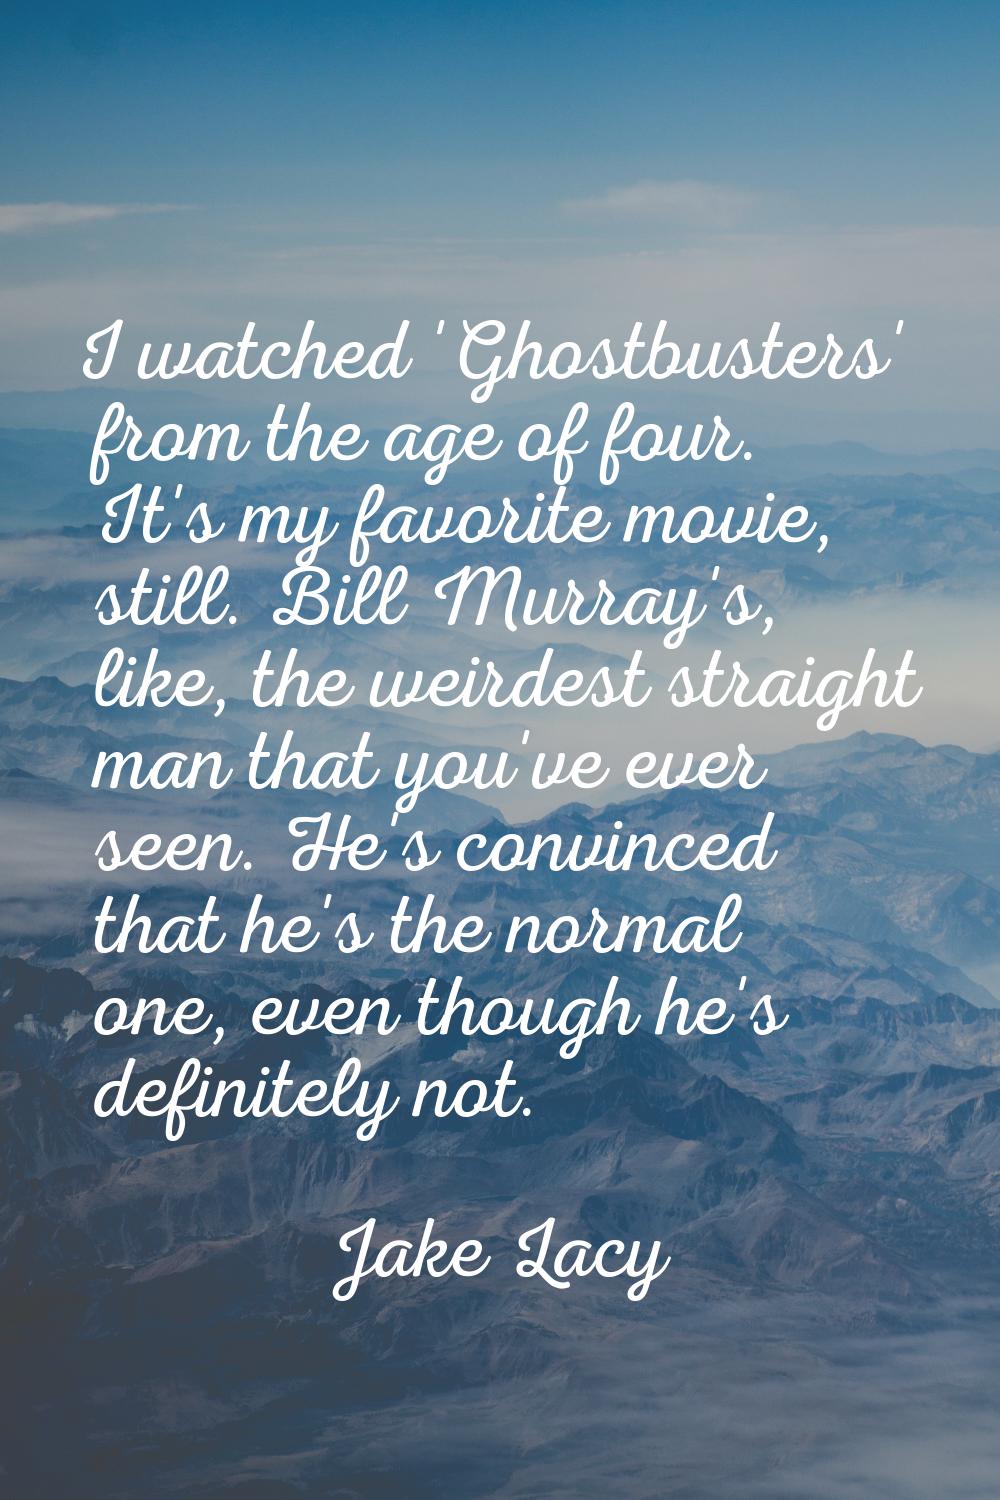 I watched 'Ghostbusters' from the age of four. It's my favorite movie, still. Bill Murray's, like, 